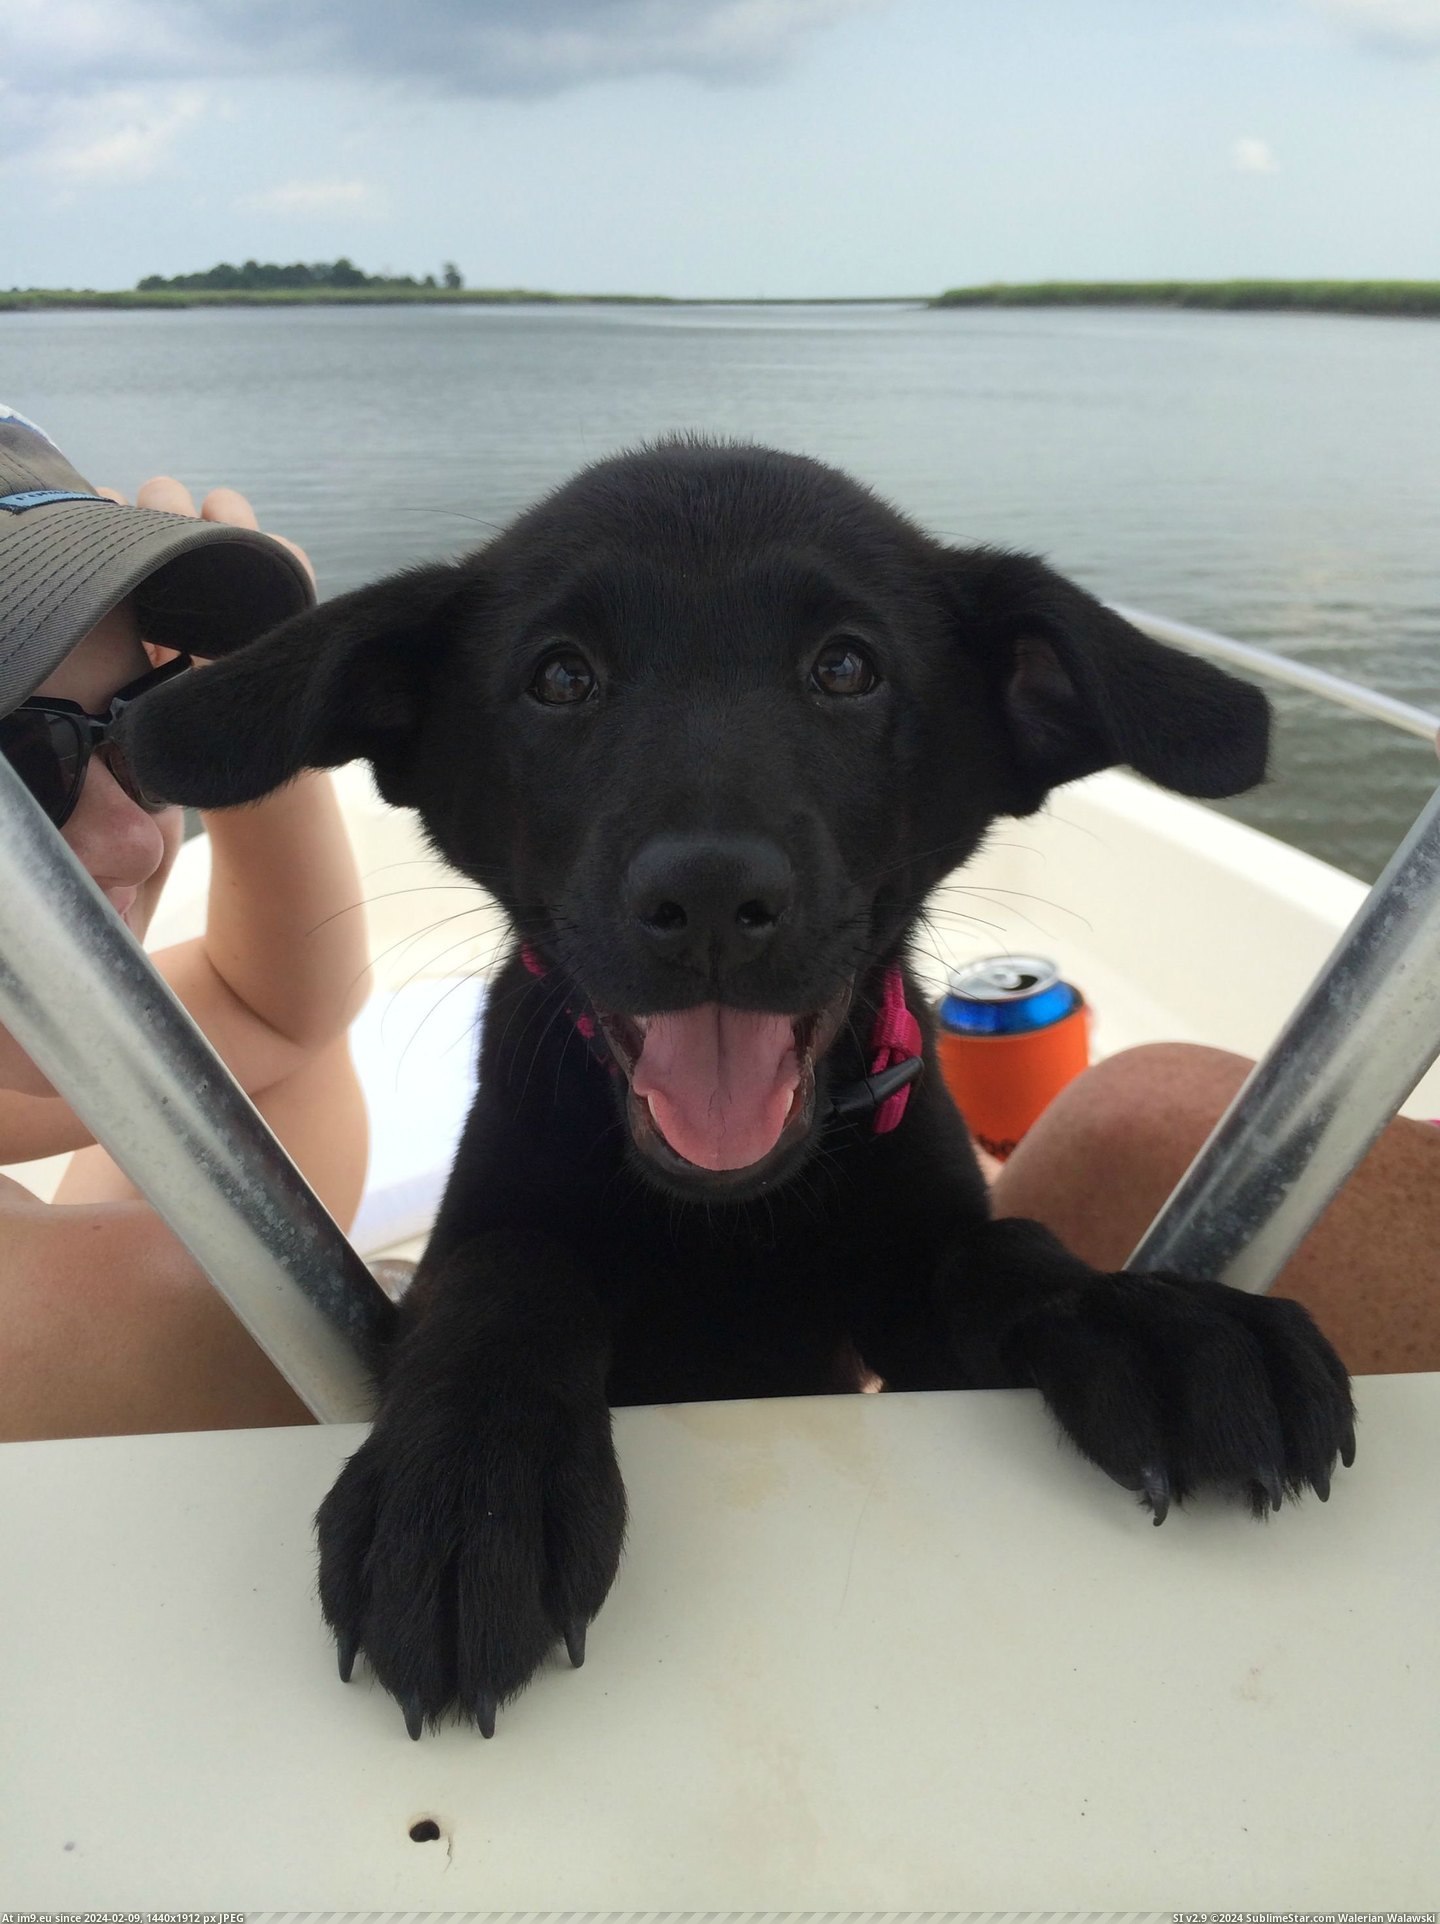 #Day #Meet #Ruw #Boat #Pups [Aww] Pups first day on the boat. Reddit, meet Ruw! Pic. (Изображение из альбом My r/AWW favs))